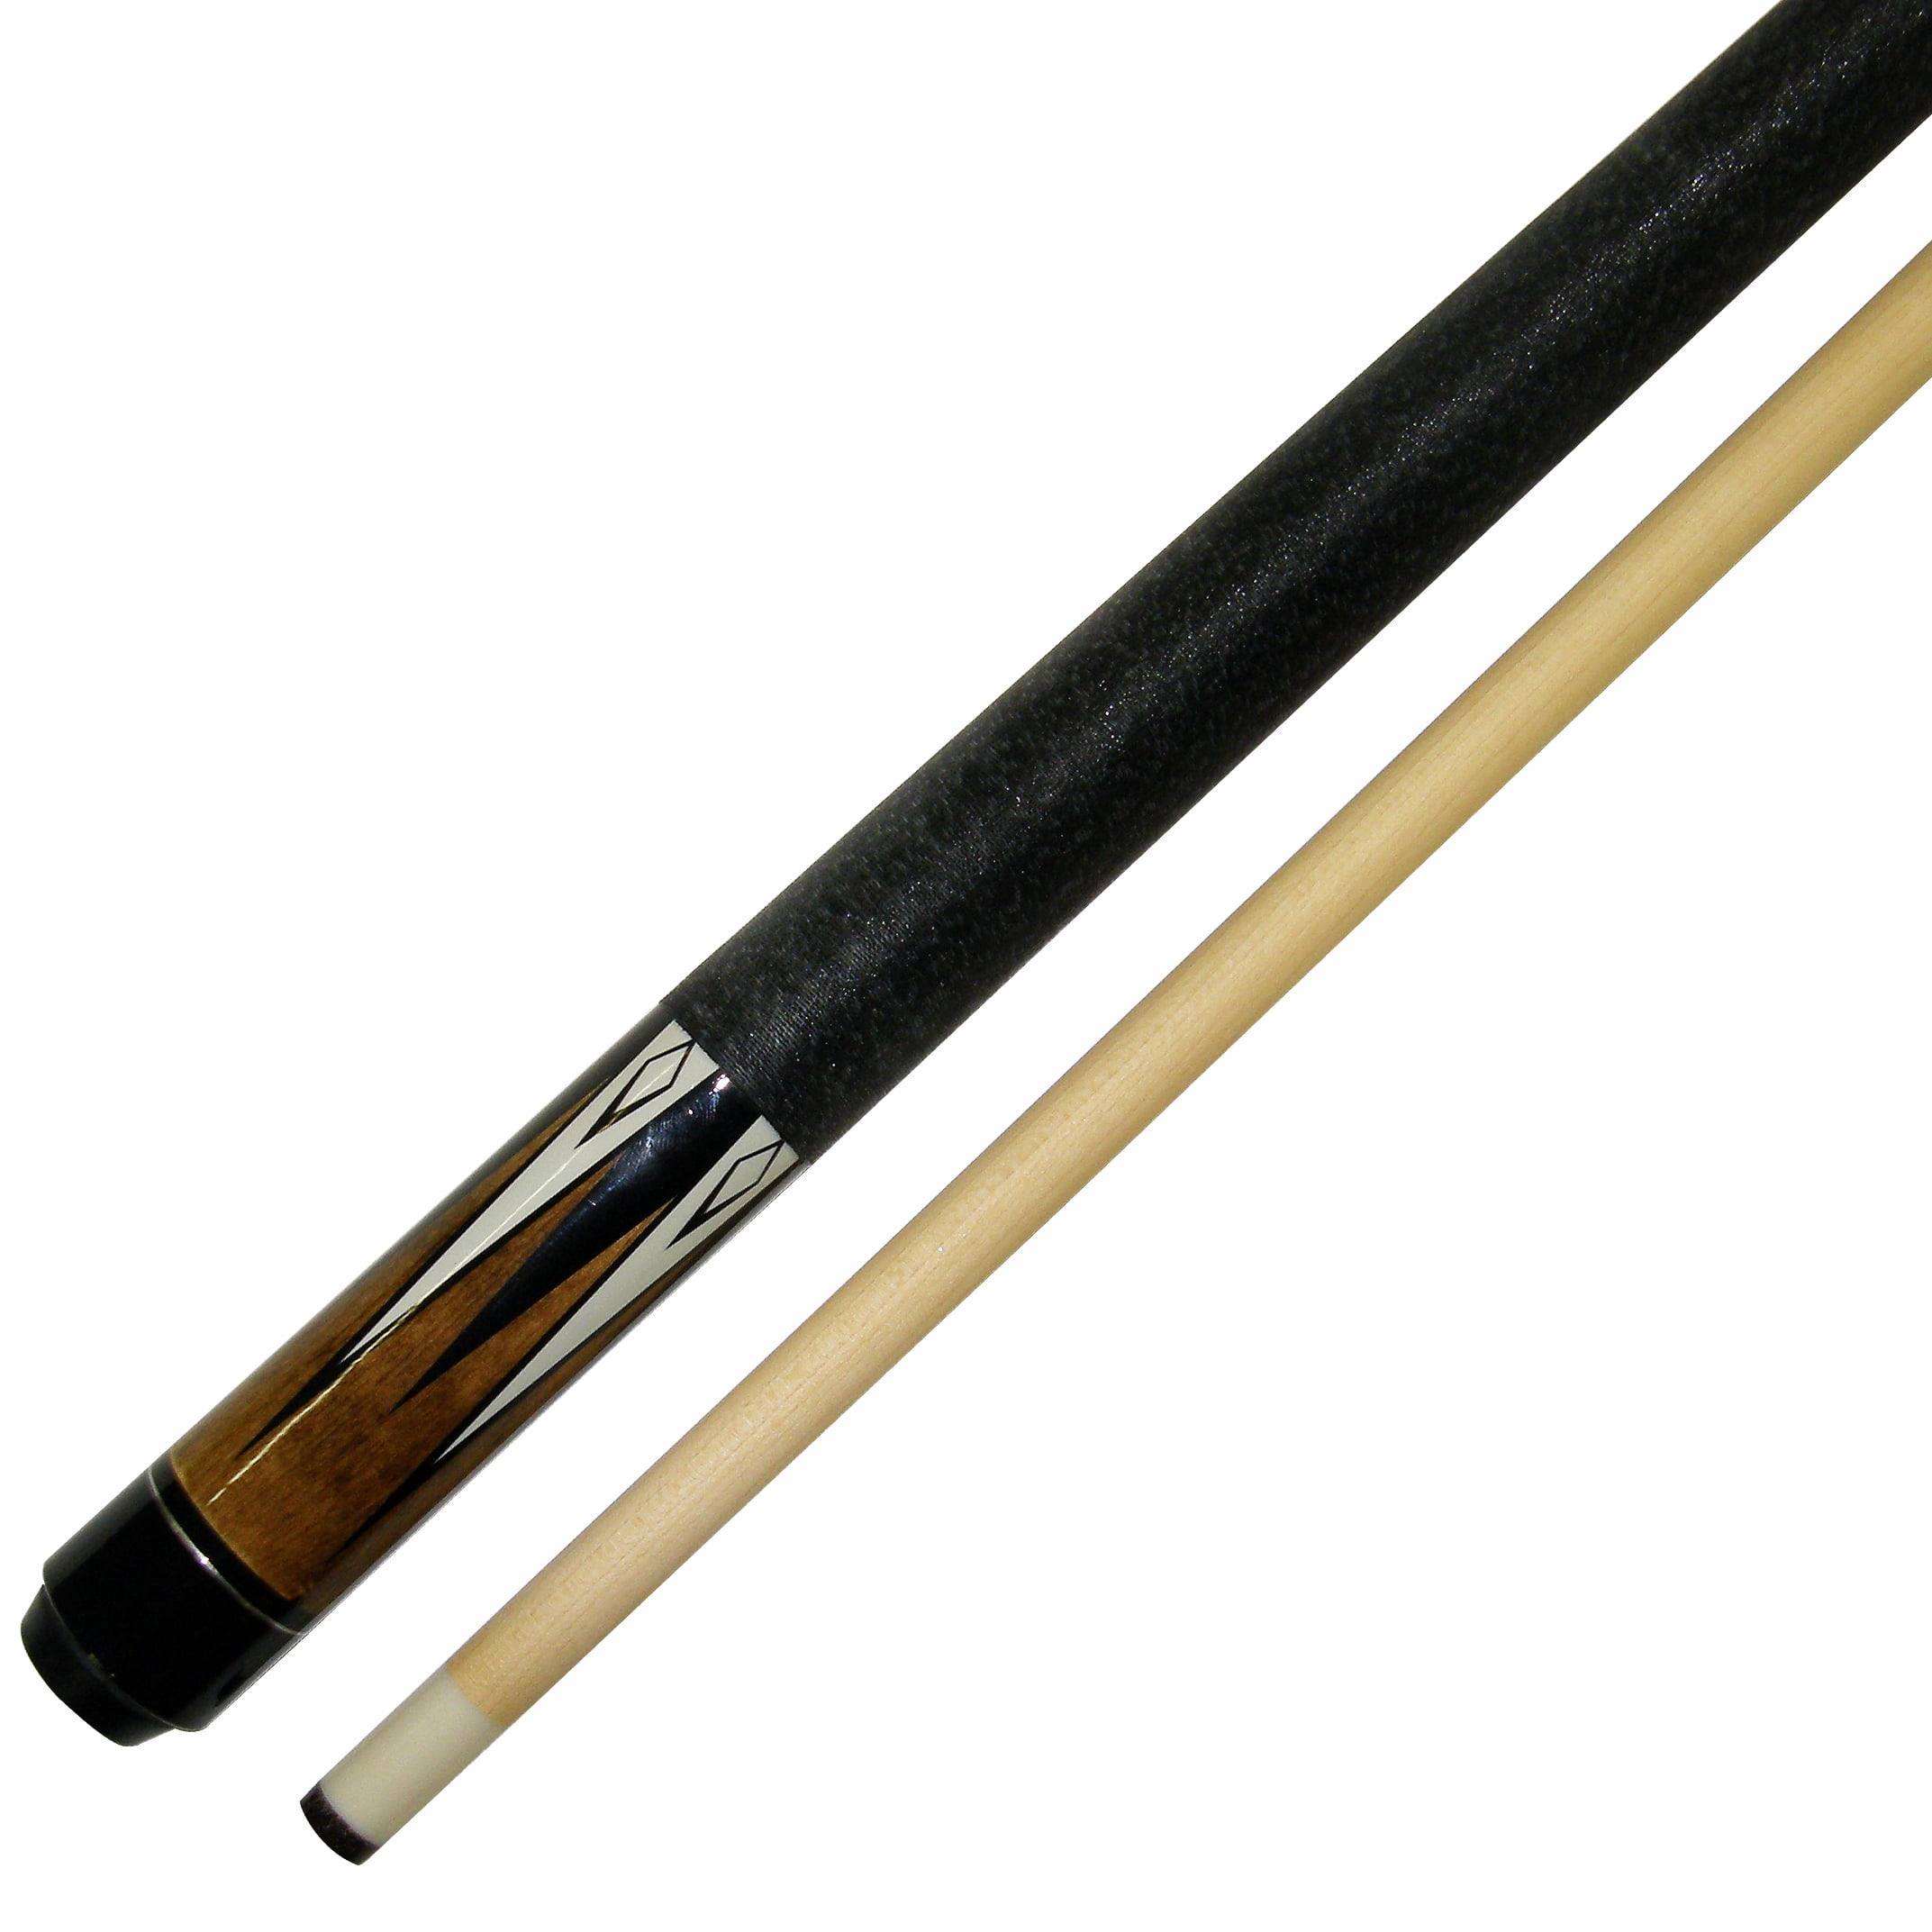 2 x 42" MEDIUM SIZE POOL CUES For HOME & PUB TABLES & Tips 